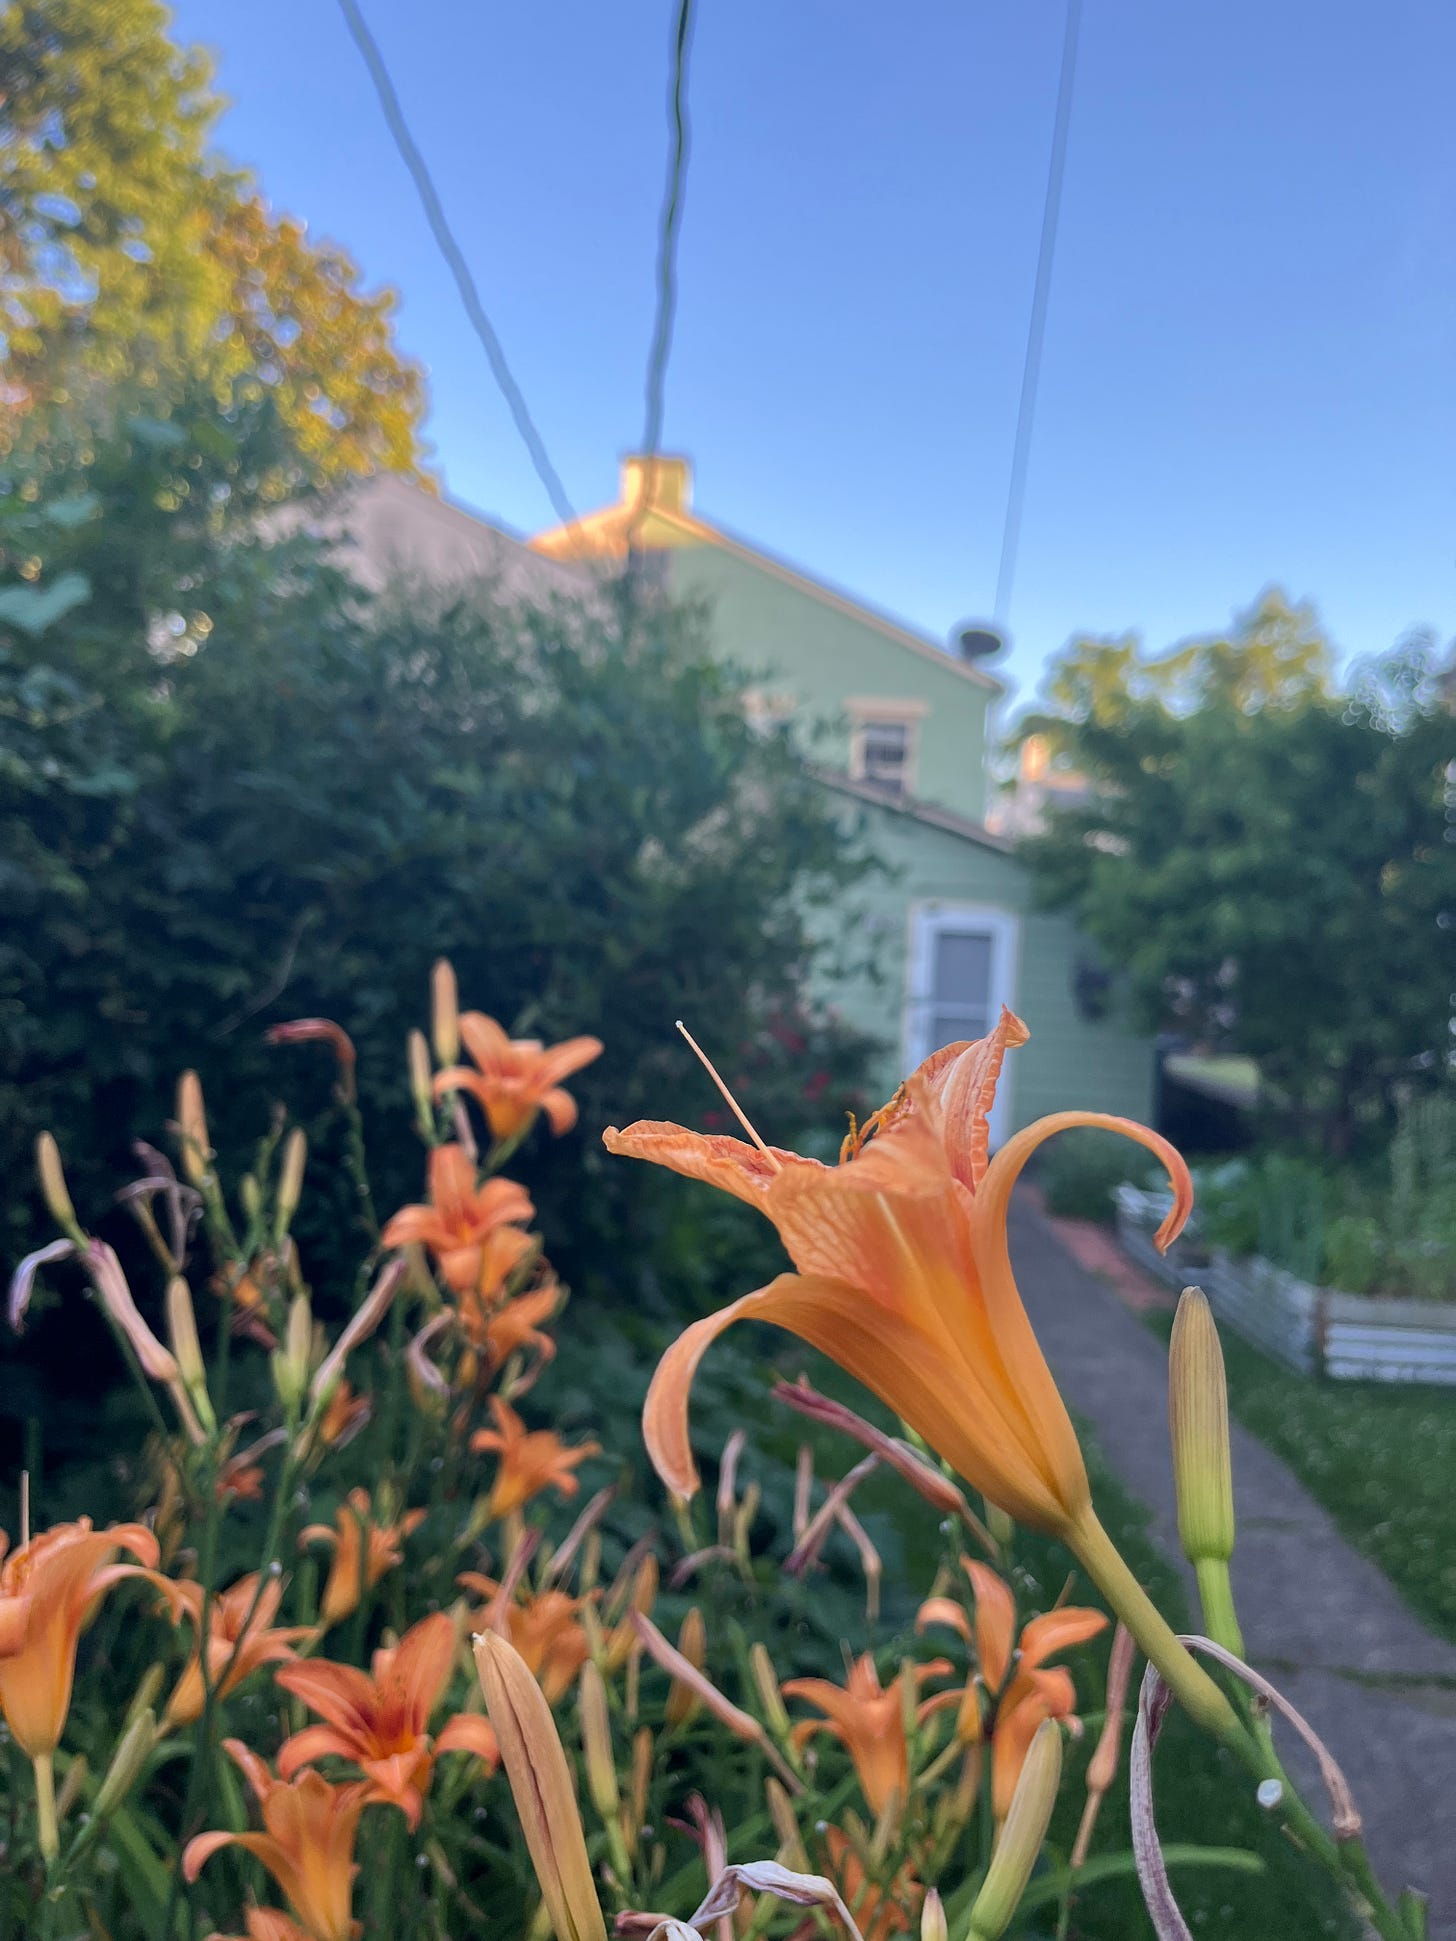 In the foreground, an orange day lily. In the background, the back of a house, blue sky with power lines cutting across it